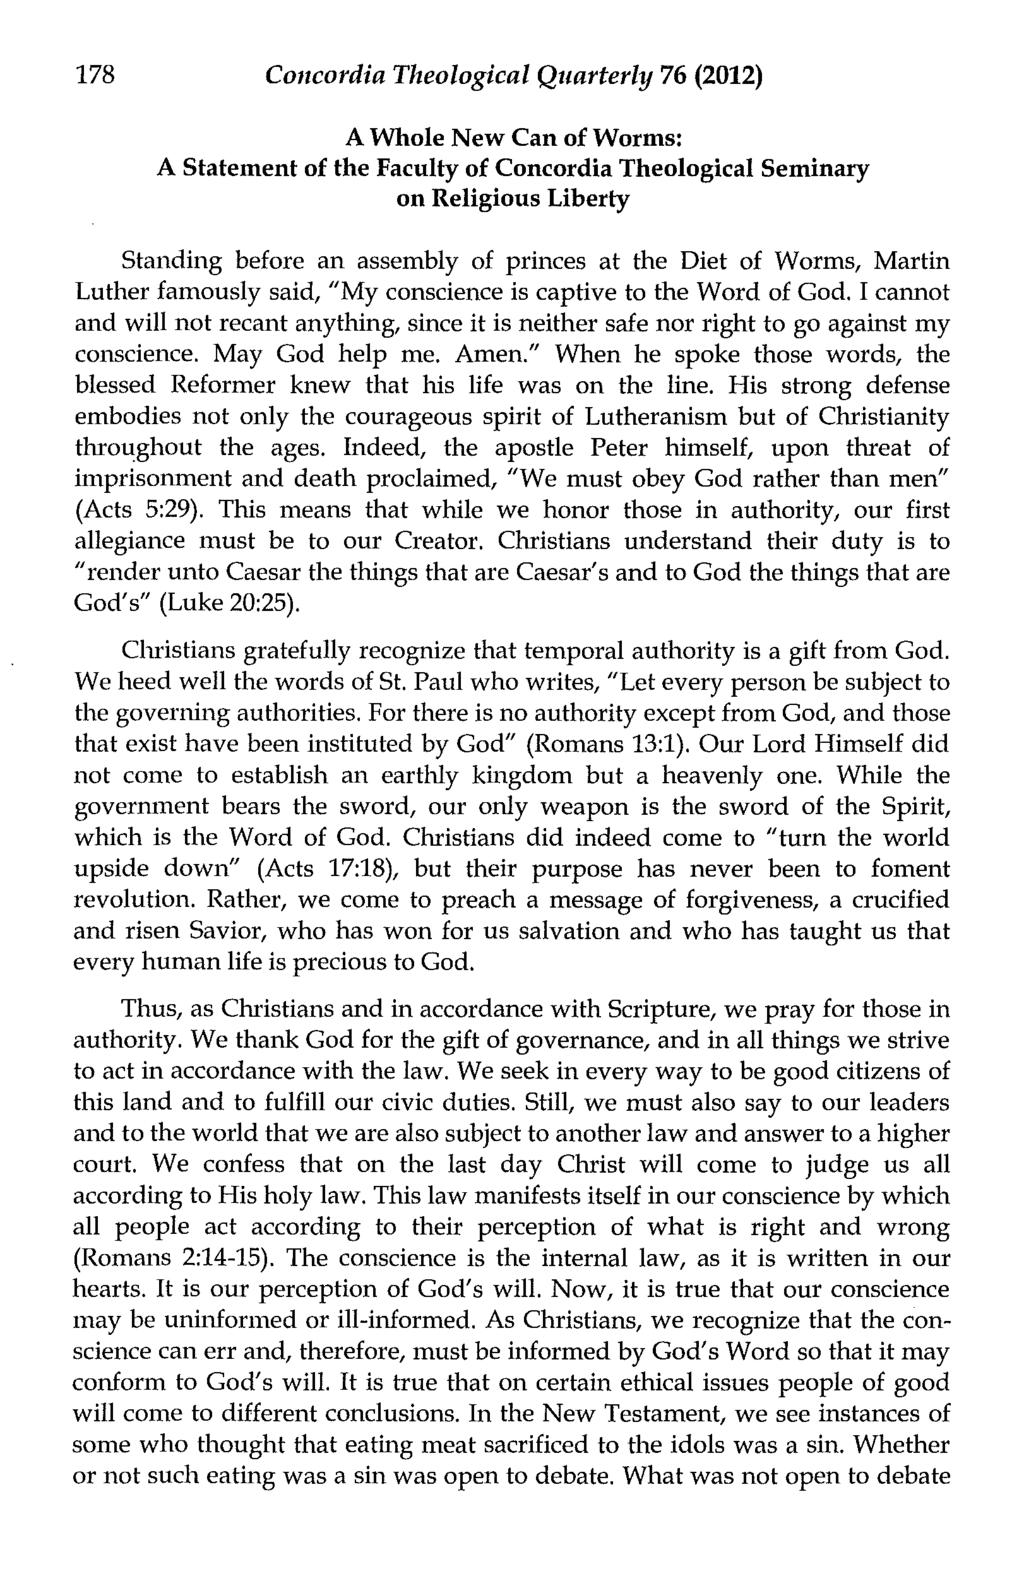 178 Concordia Theological Quarterly 76 (2012) A Whole New Can of Worms: A Statement of the Faculty of Concordia Theological Seminary on Religious Liberty Standing before an assembly of princes at the